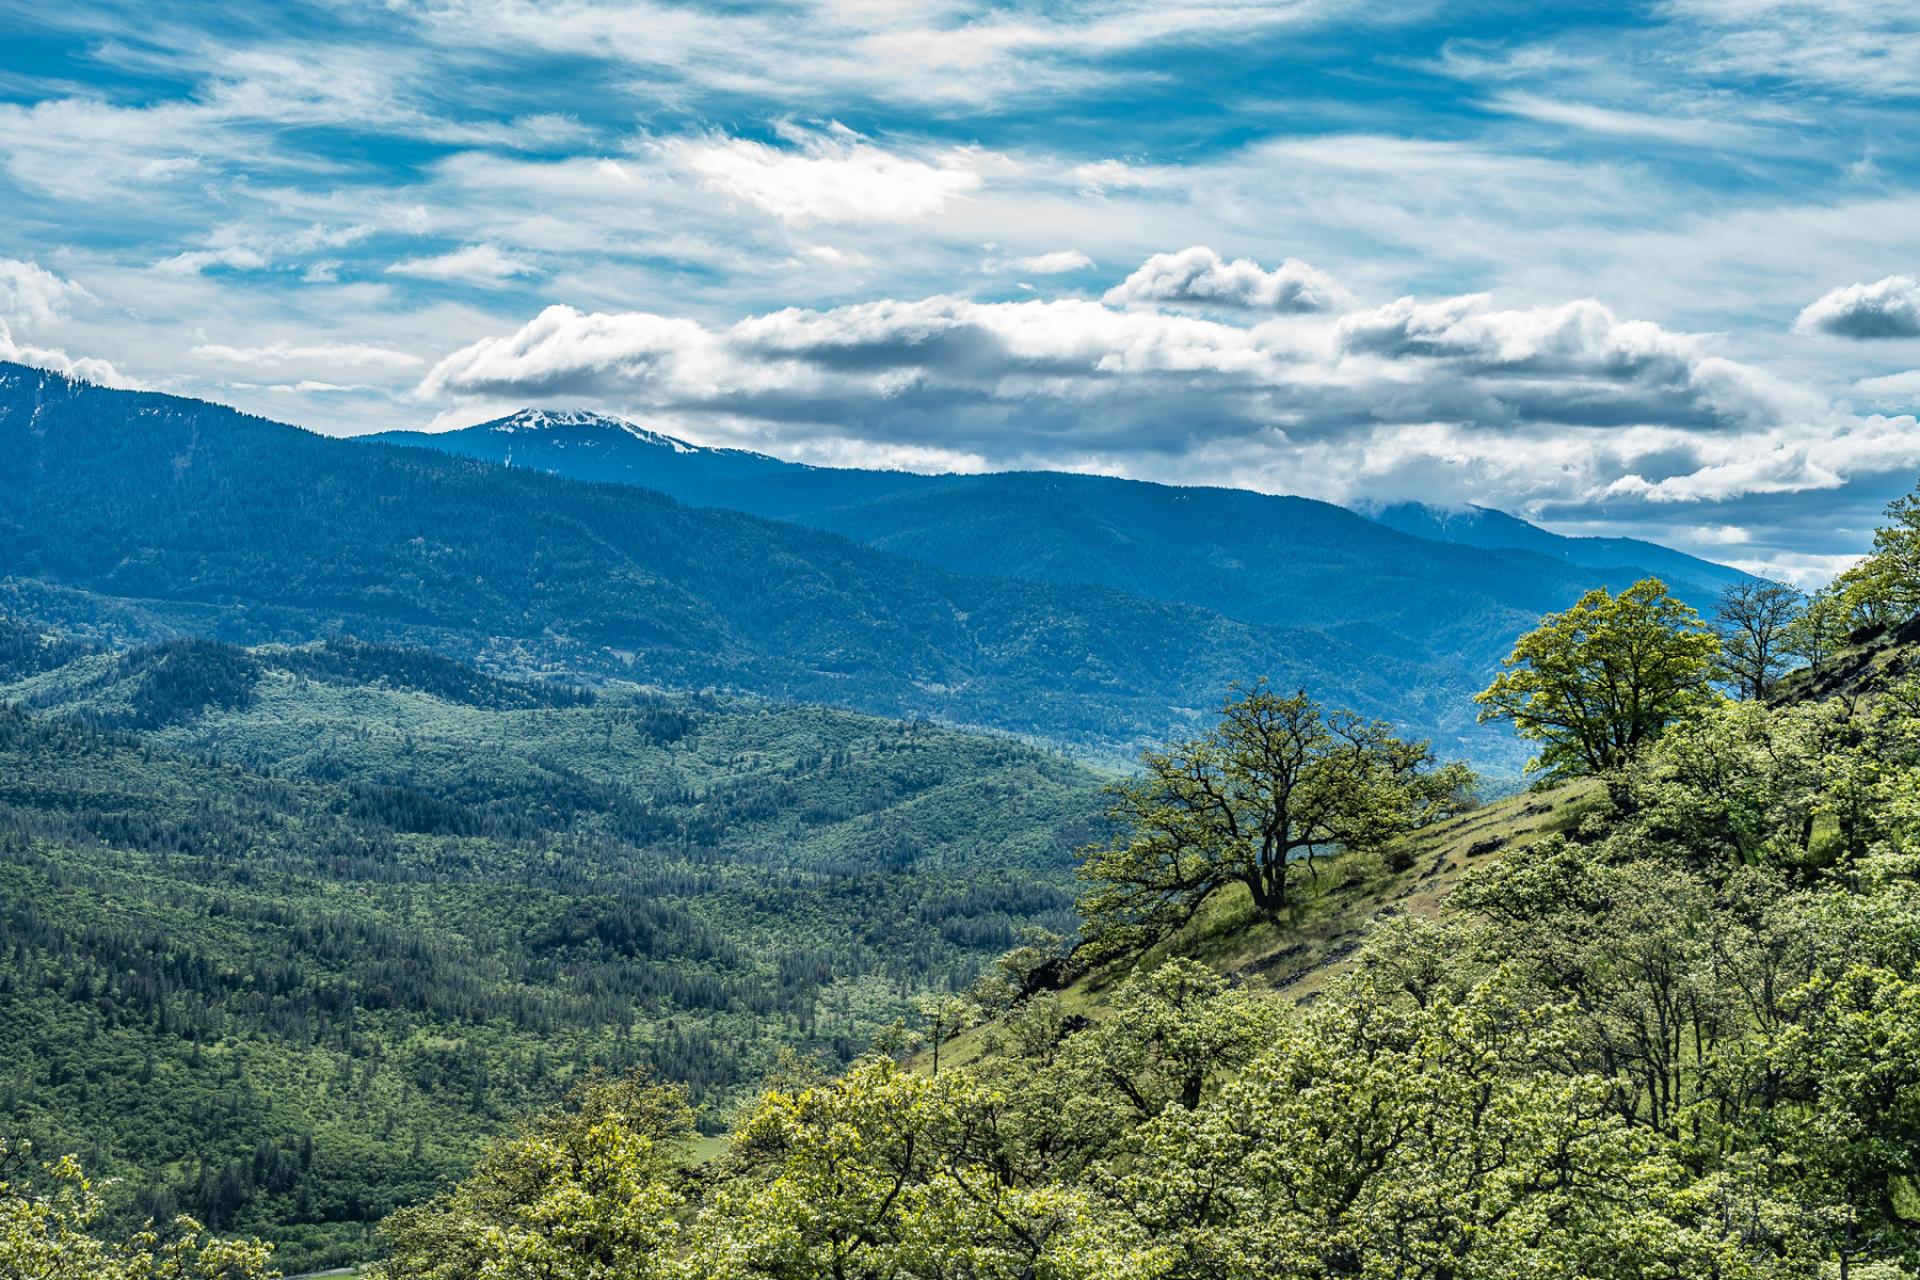 Wooded slopes in foreground, mountain in background in Cascade-Siskiyou National Monument, Oregon